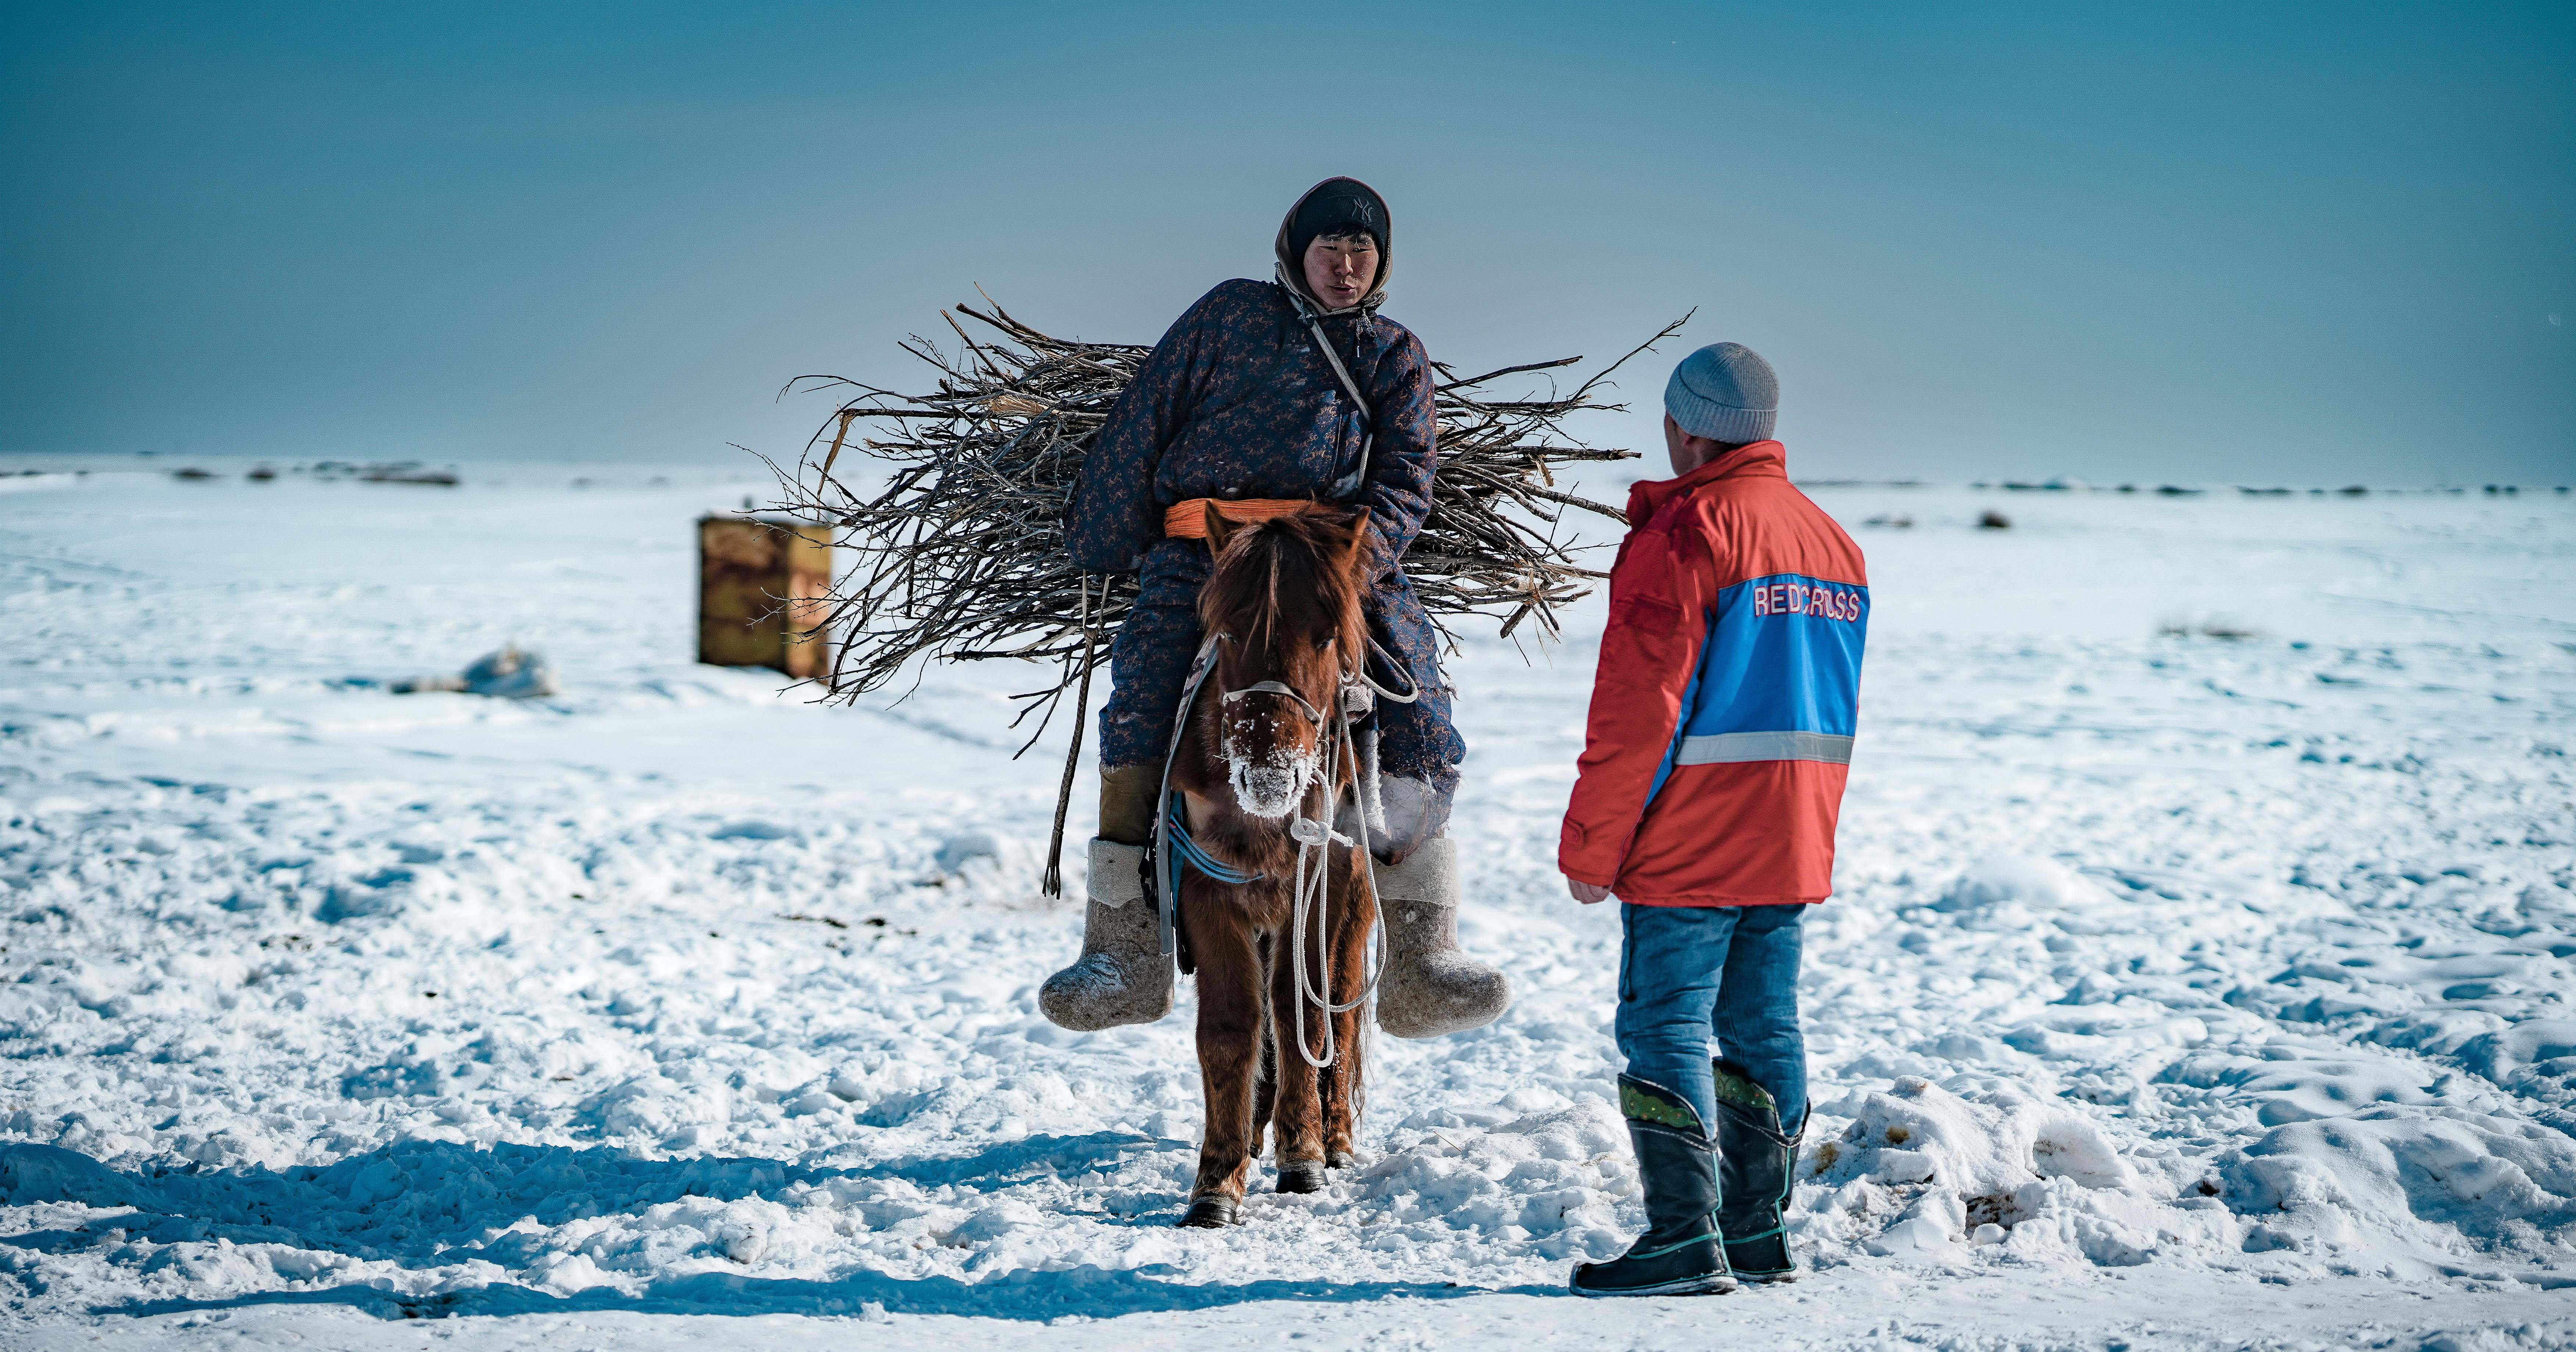 Finnish Red Cross helps those suffering from cold wave in Mongolia